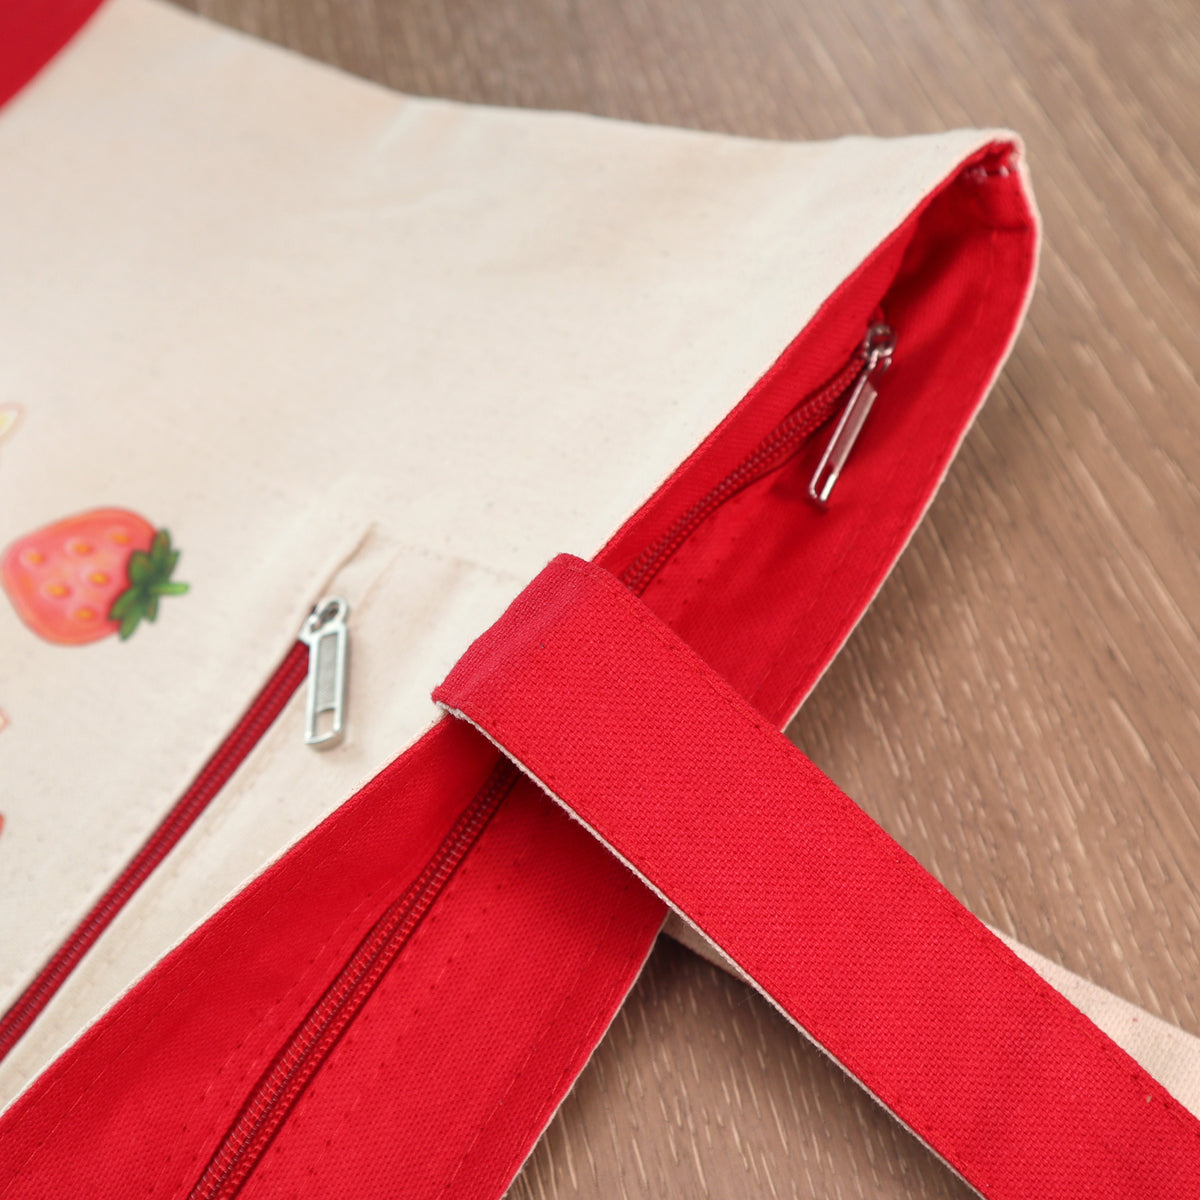 &quot;Strawberry&quot; Zippered Tote Bag – Red